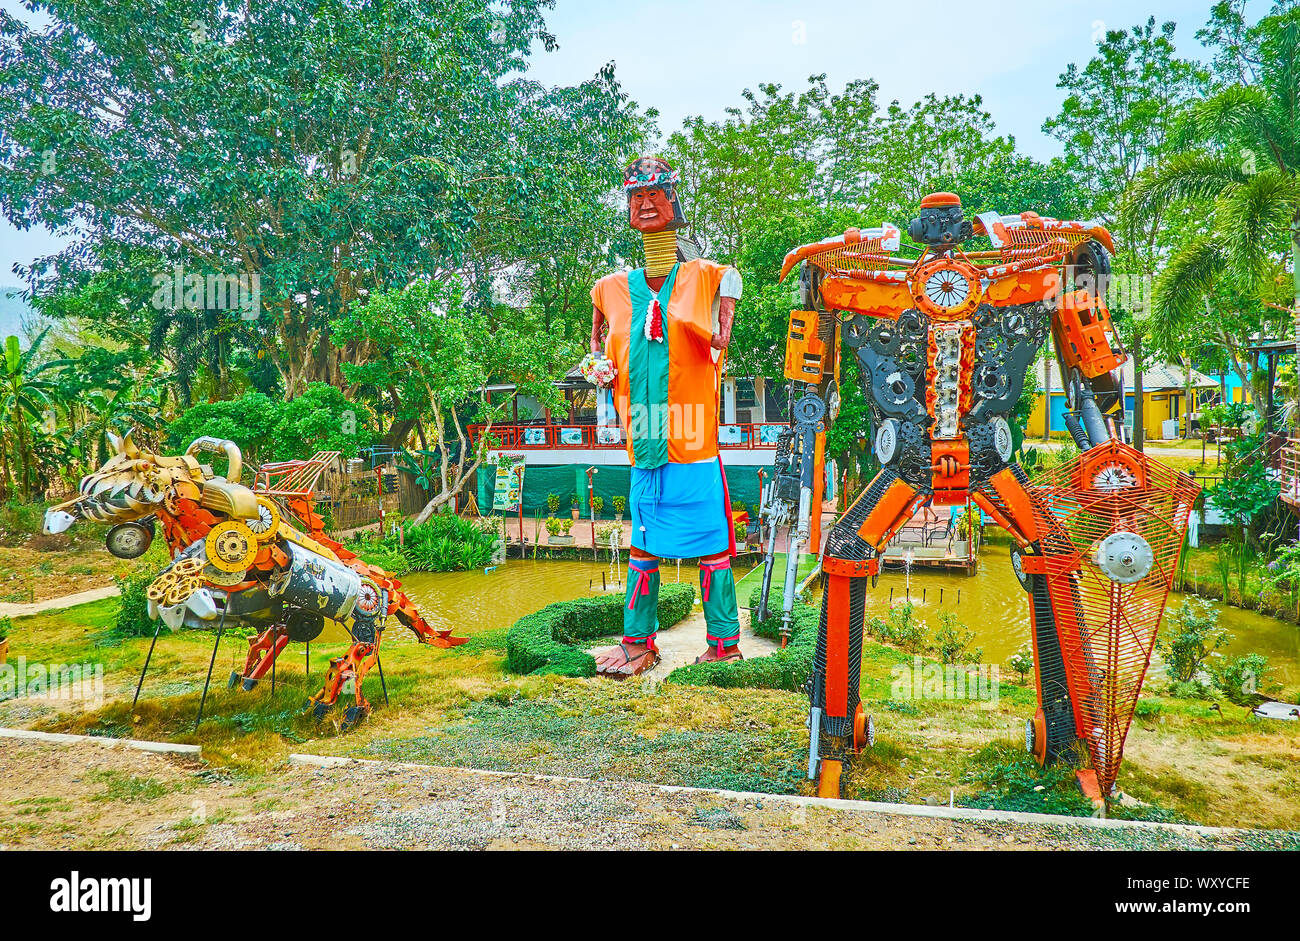 PAI, THAILAND - MAY 5, 2019: The scenic park with small ponds and interesing installations of transformer robots and Karen tribe long neck woman, on M Stock Photo